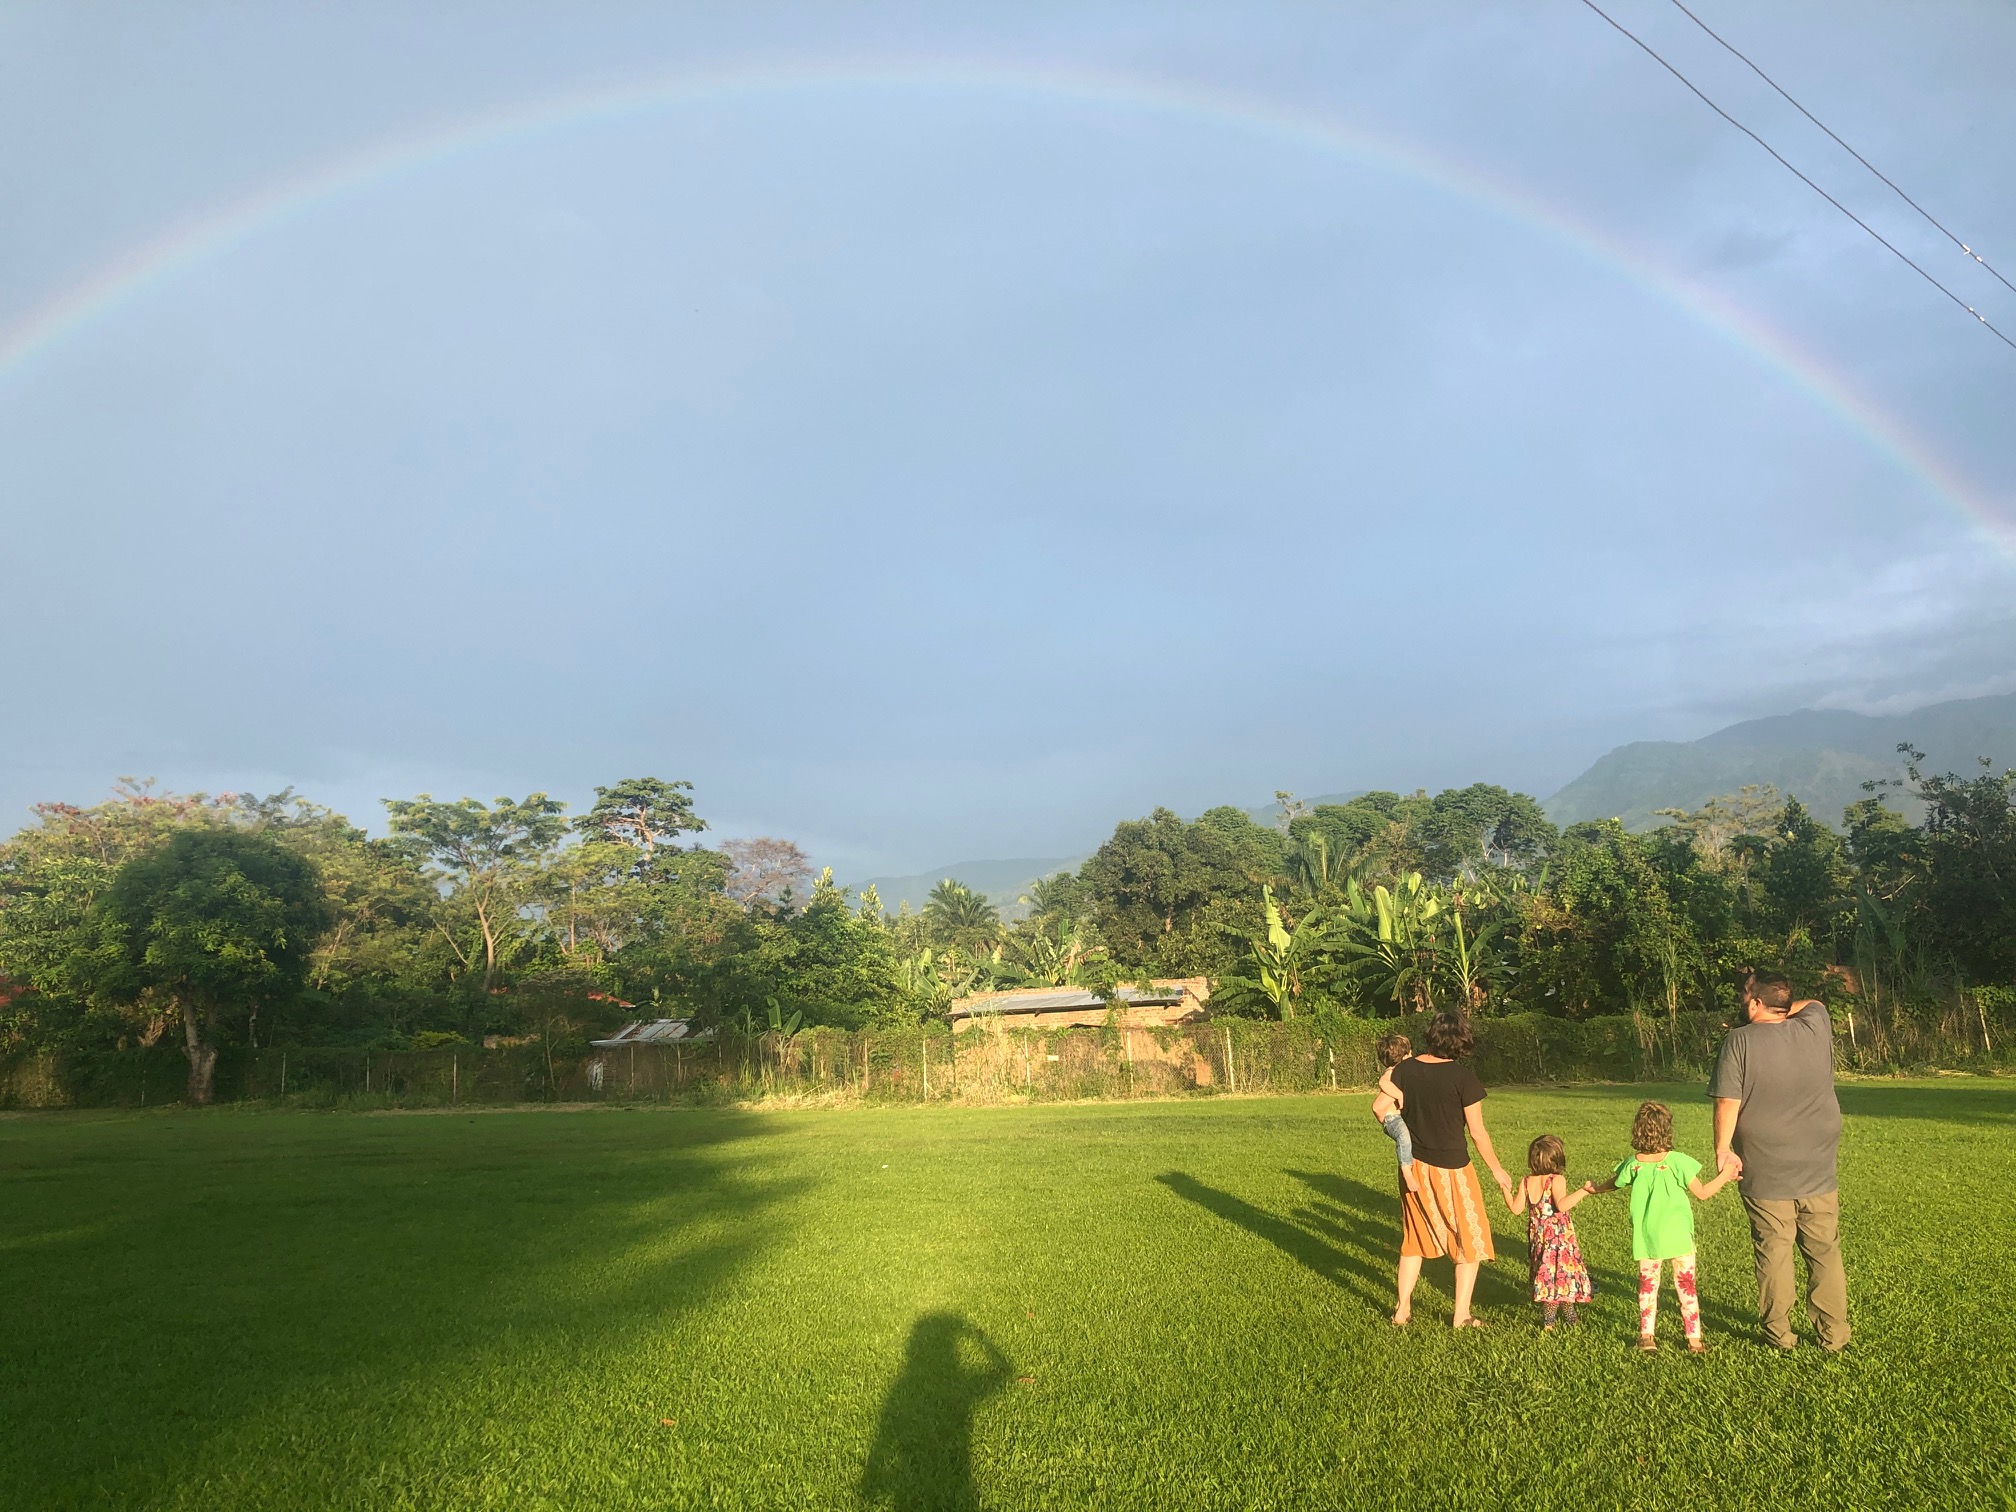 Family in a field viewing a rainbow.